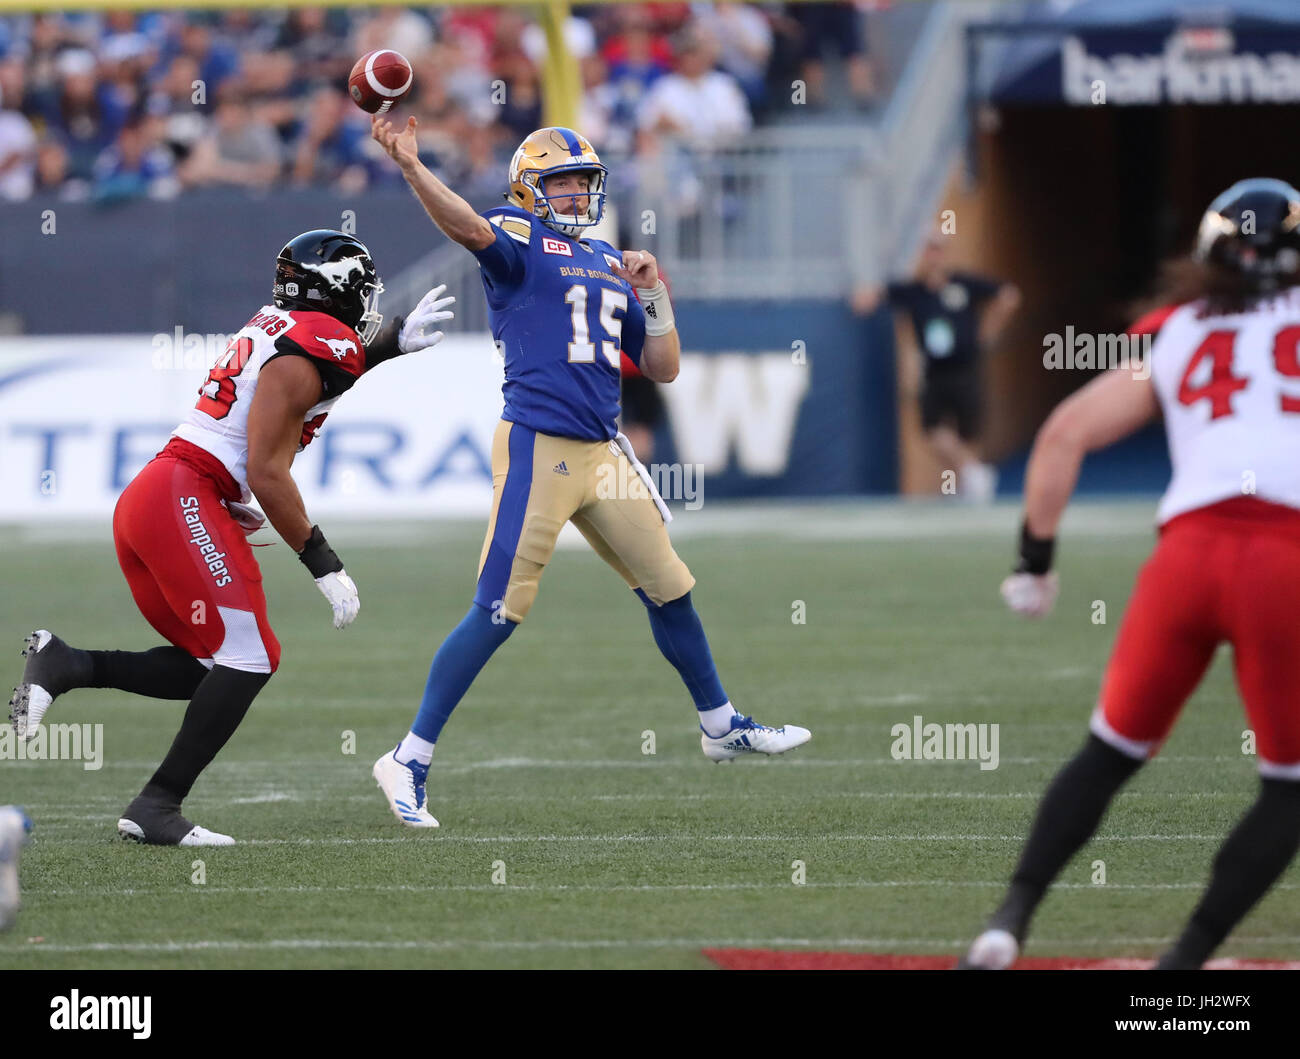 Winnipeg, Manitoba, CAN. 7th July, 2017. July 7, 2017; Winnipeg, Manitoba, CAN; Winnipeg Blue Bombers quarterback Matt Nichols (15) prepares to throw the ball as he is pressured by Calgary Stampeders defensive lineman James Vaughters (98) during the first half at Investors Group Field. Mandatory Credit: Bruce Fedyck- Zuma Media Credit: Bruce Fedyck/ZUMA Wire/Alamy Live News Stock Photo